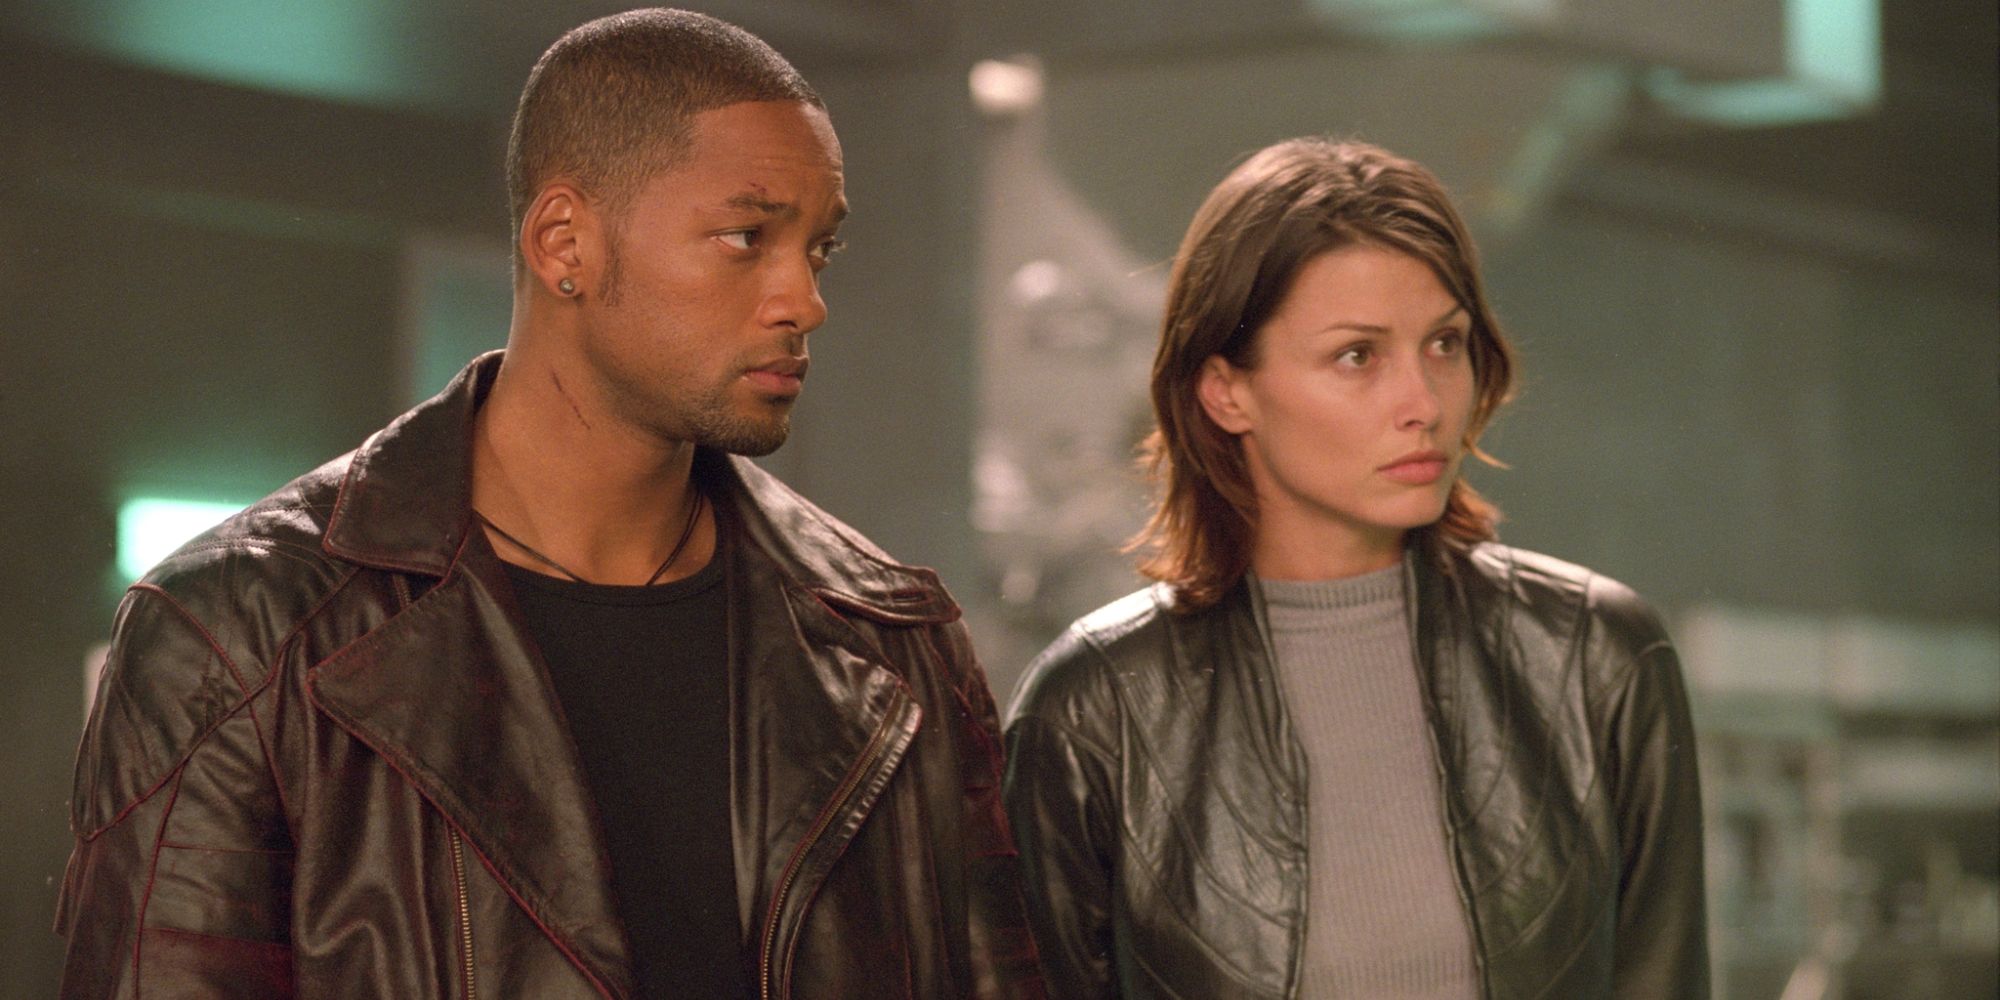 Will Smith and Bridget Moynahan in 